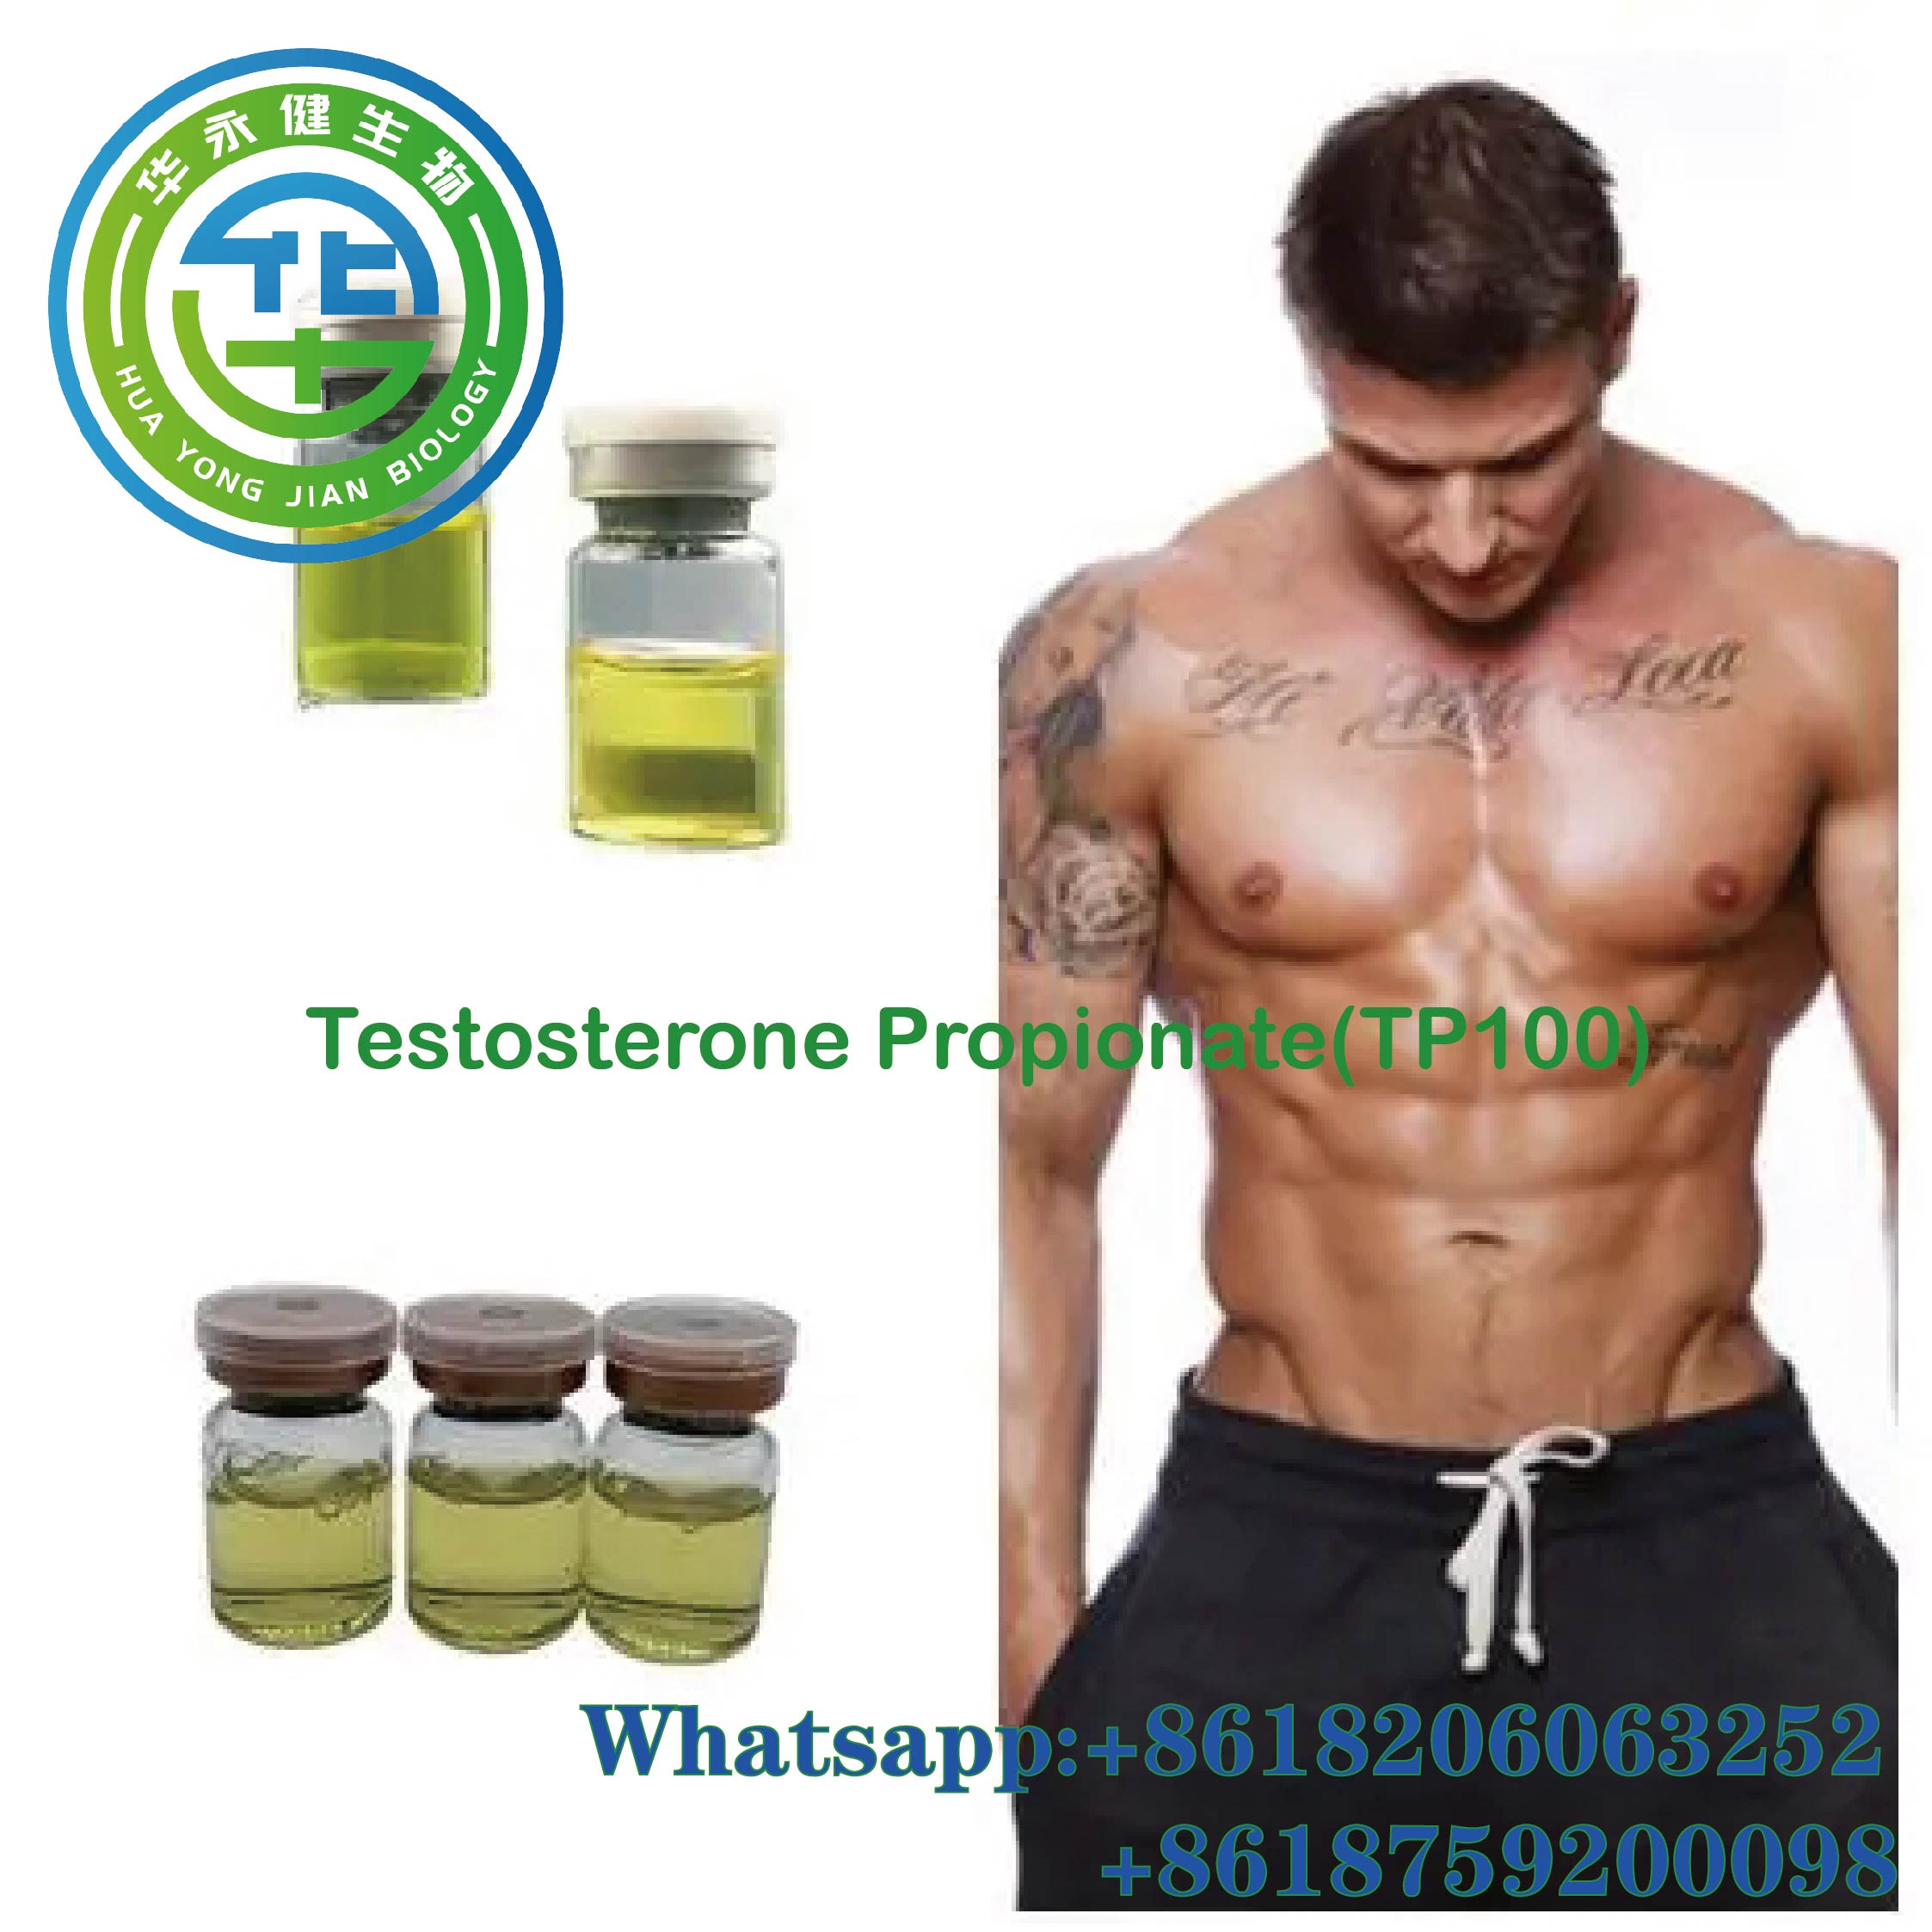 Testosterone Propionate Legal Injectable Steroids 100mg/ml Yellow Liquid TP100 For Muscle Strength